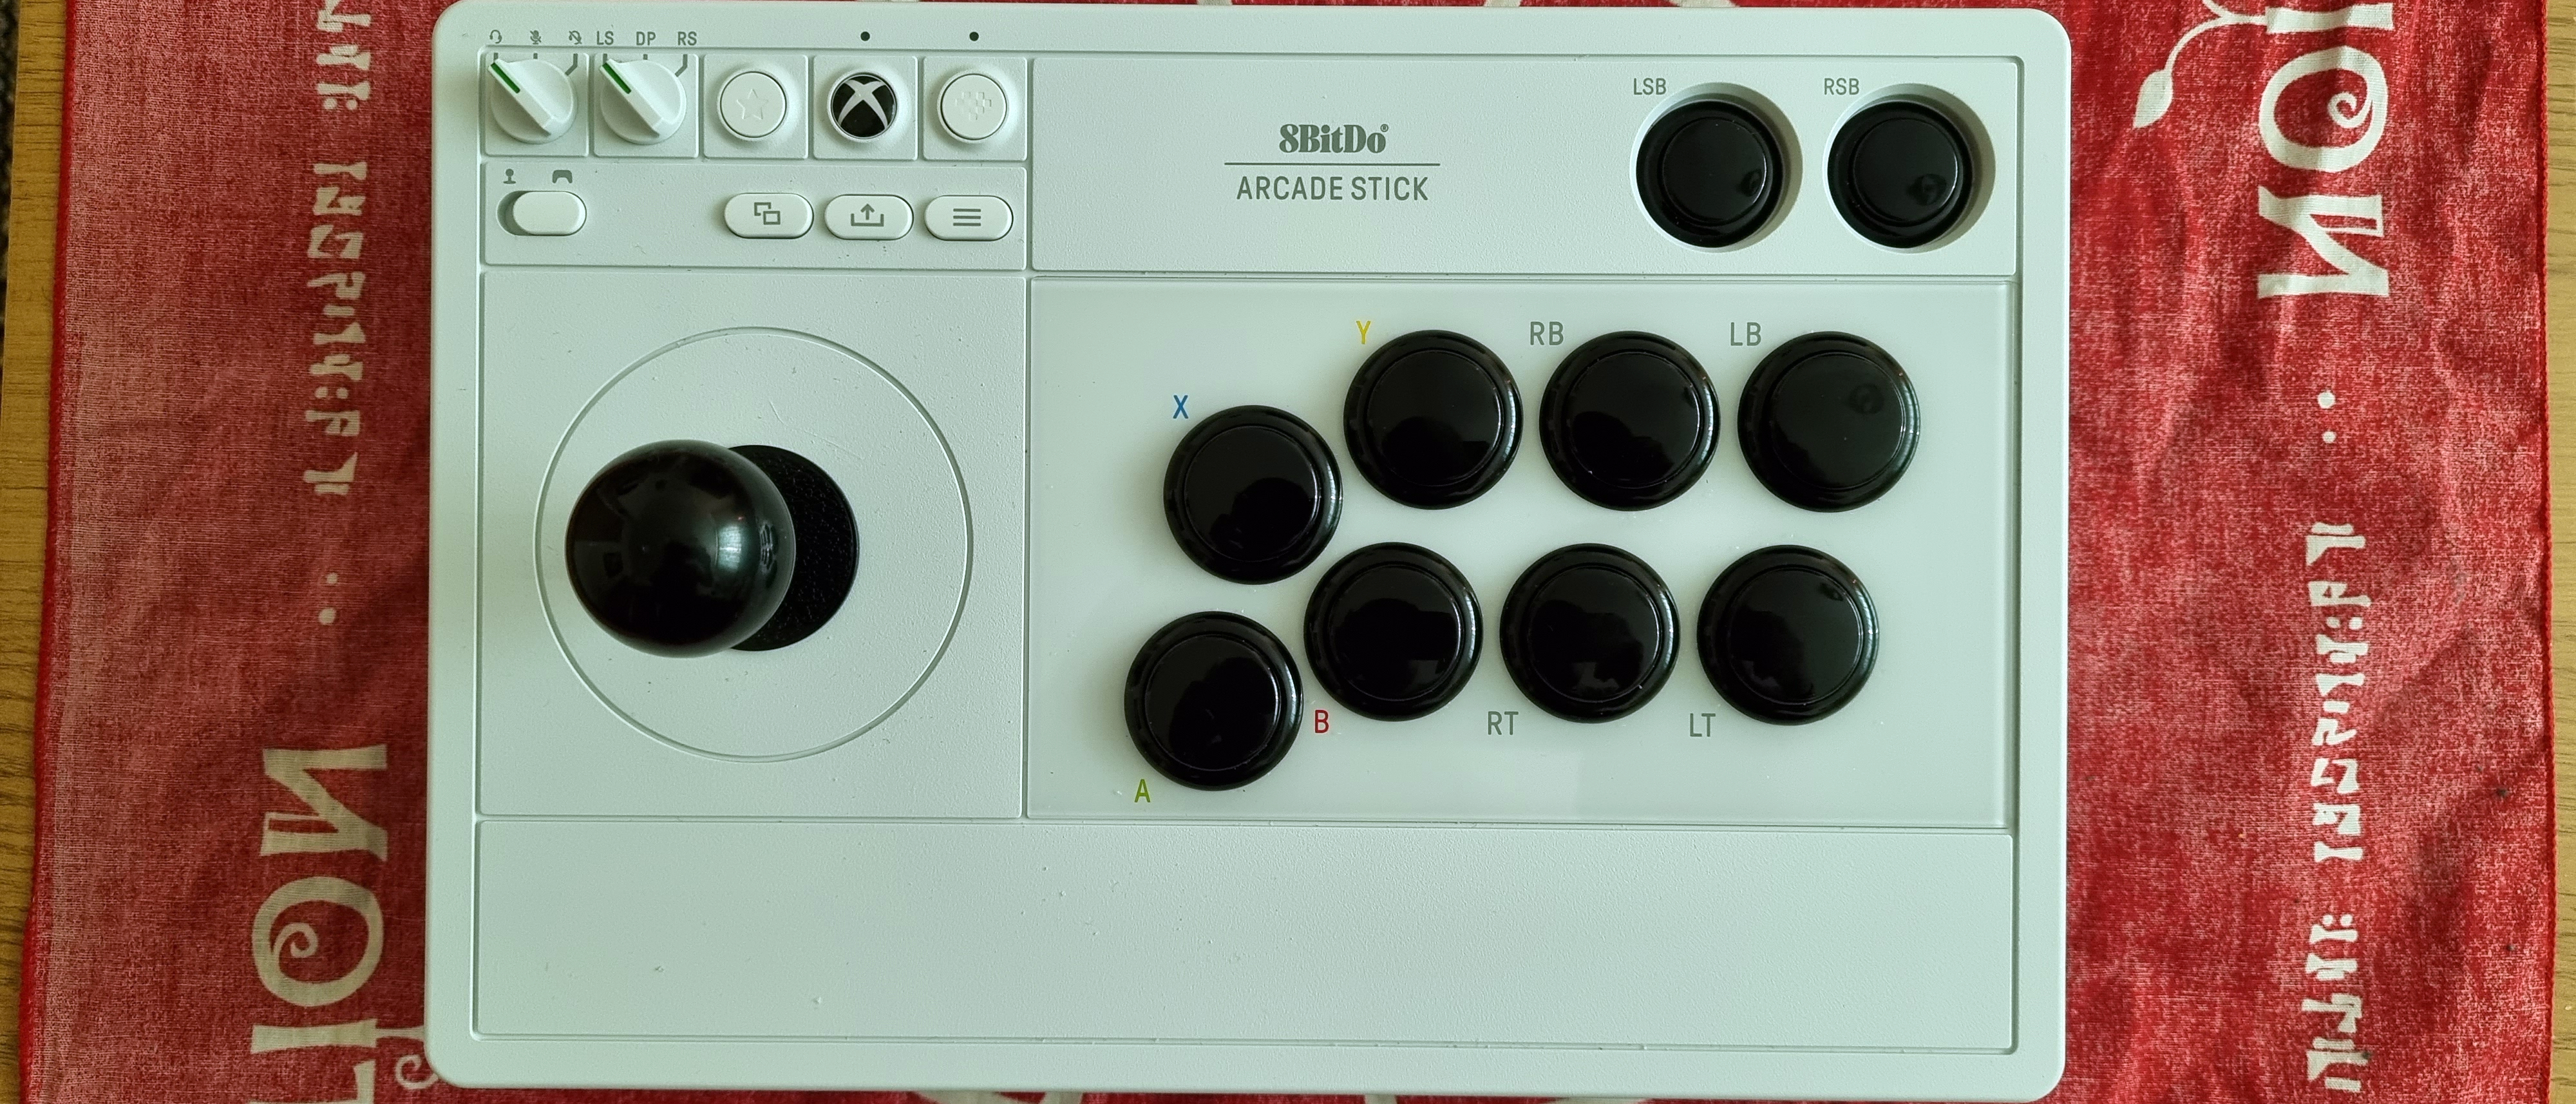 8BitDo Arcade Stick for Xbox review - an ideal fighting game companion